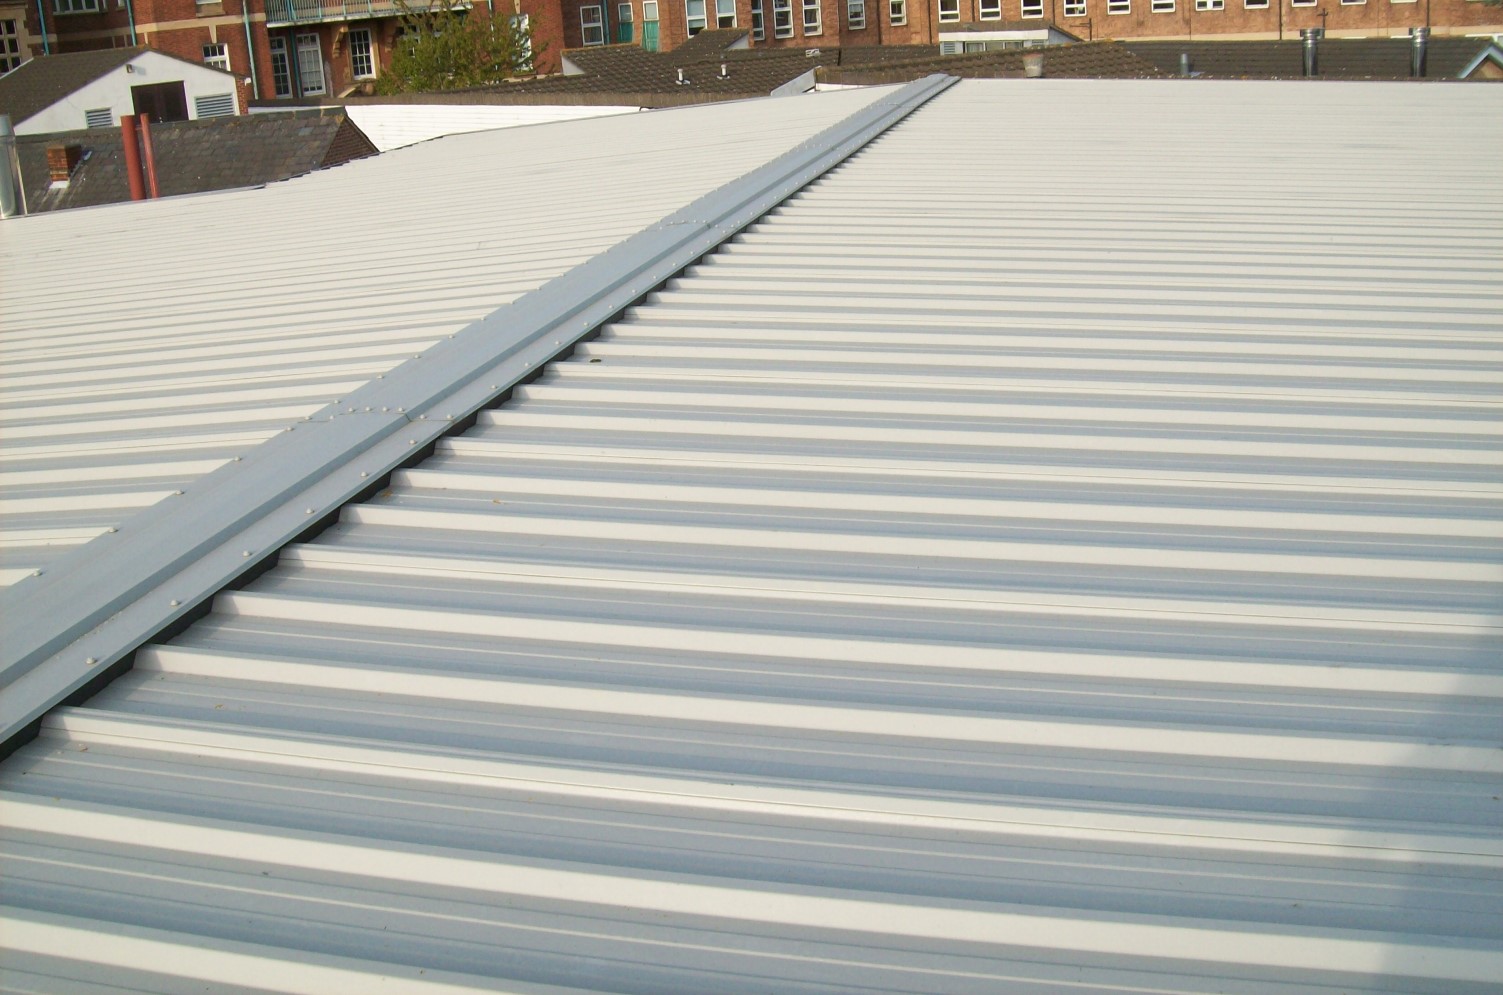 Norwich Community Hospital - Roofing